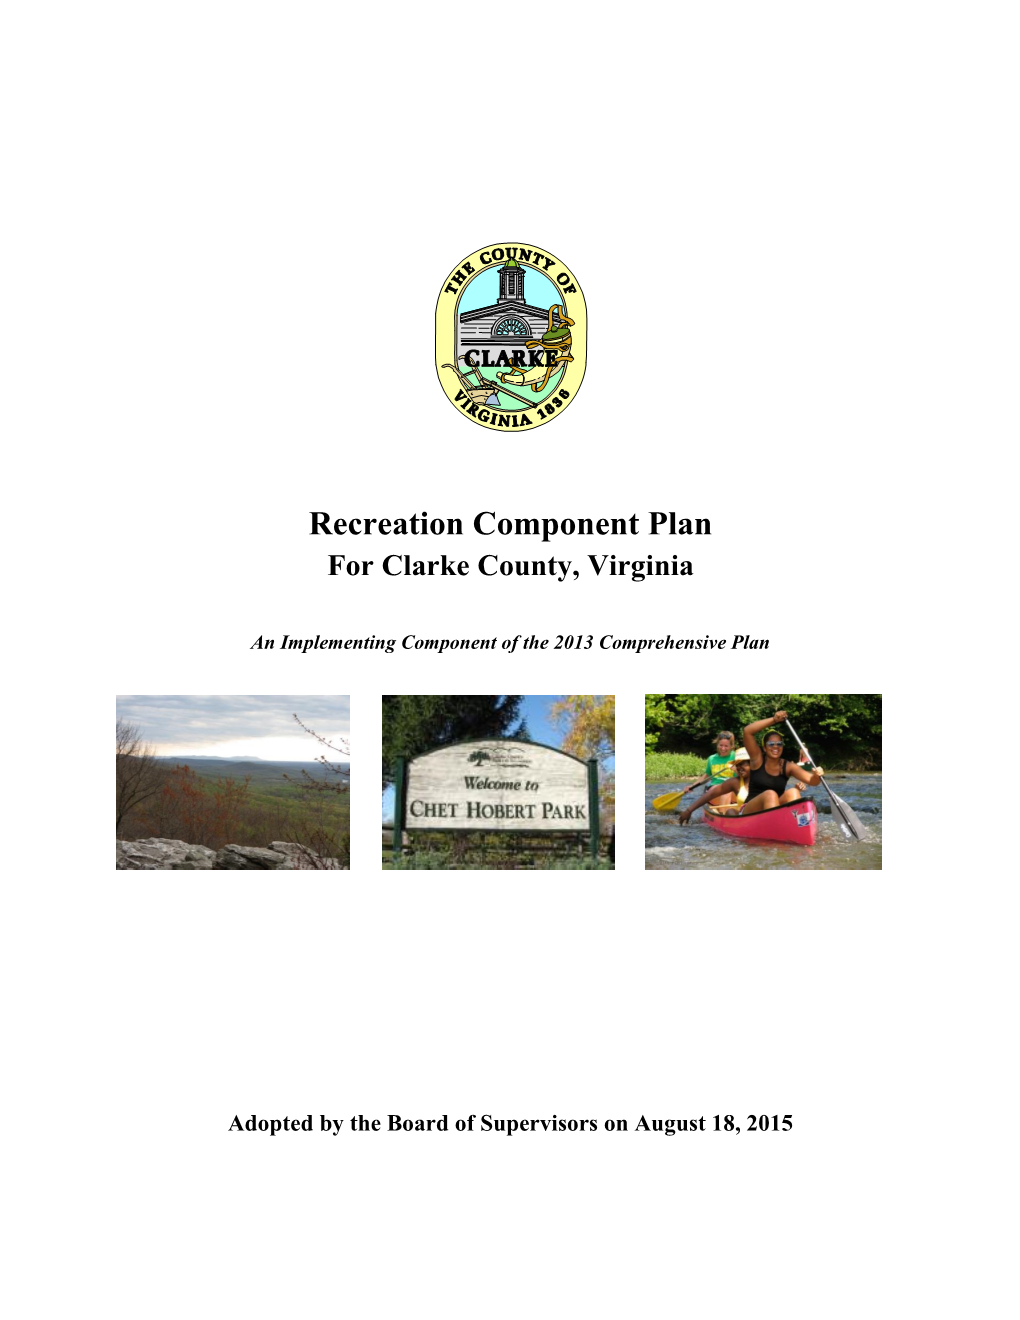 Recreation Component Plan for Clarke County, Virginia